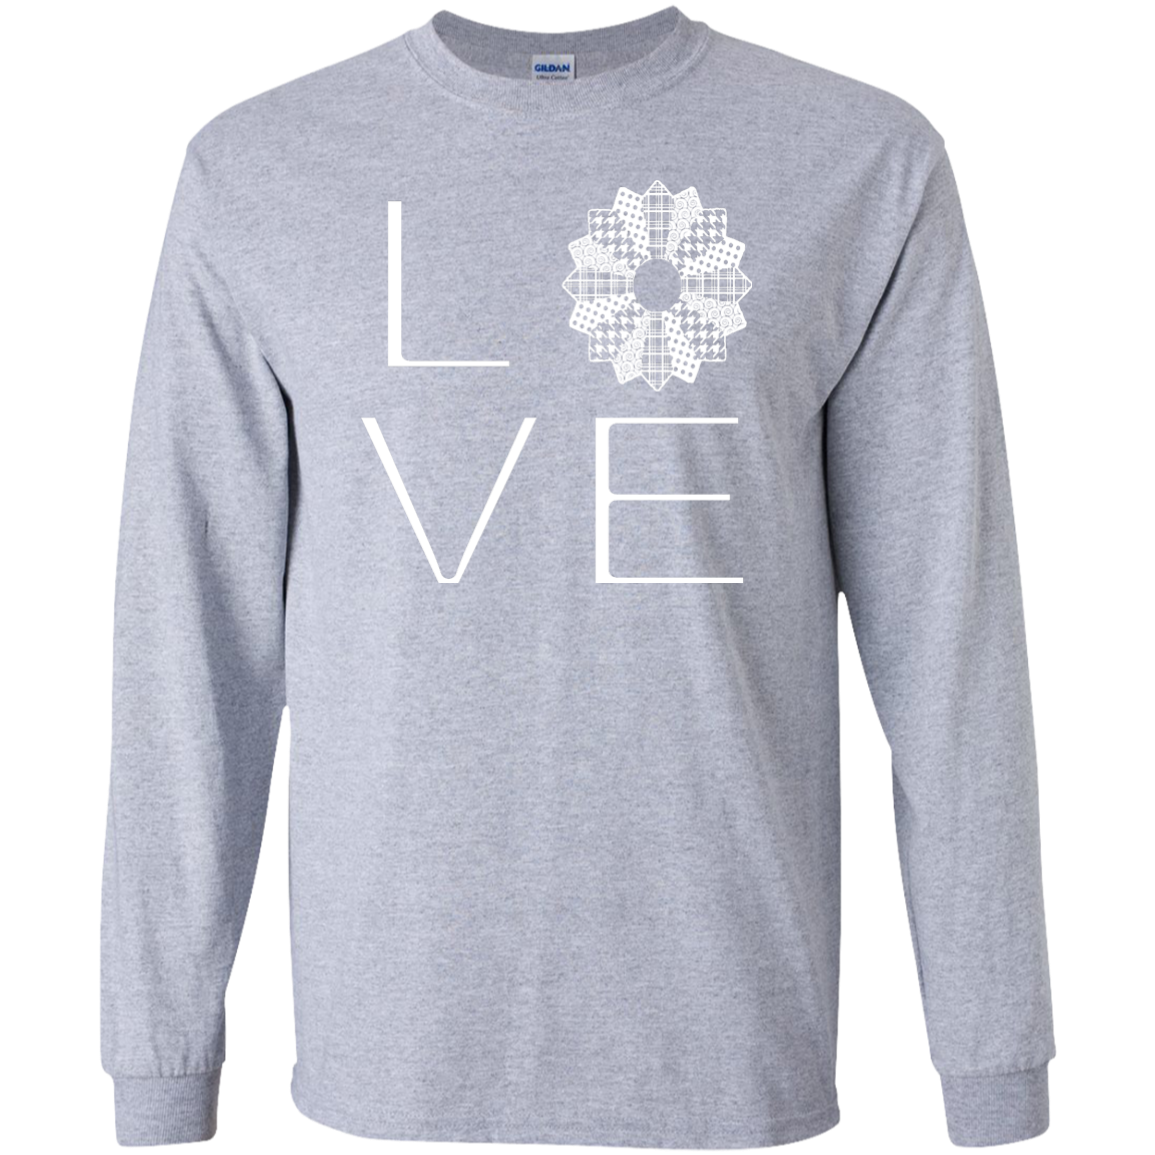 LOVE Quilting LS Ultra Cotton T-shirt - Crafter4Life - 2